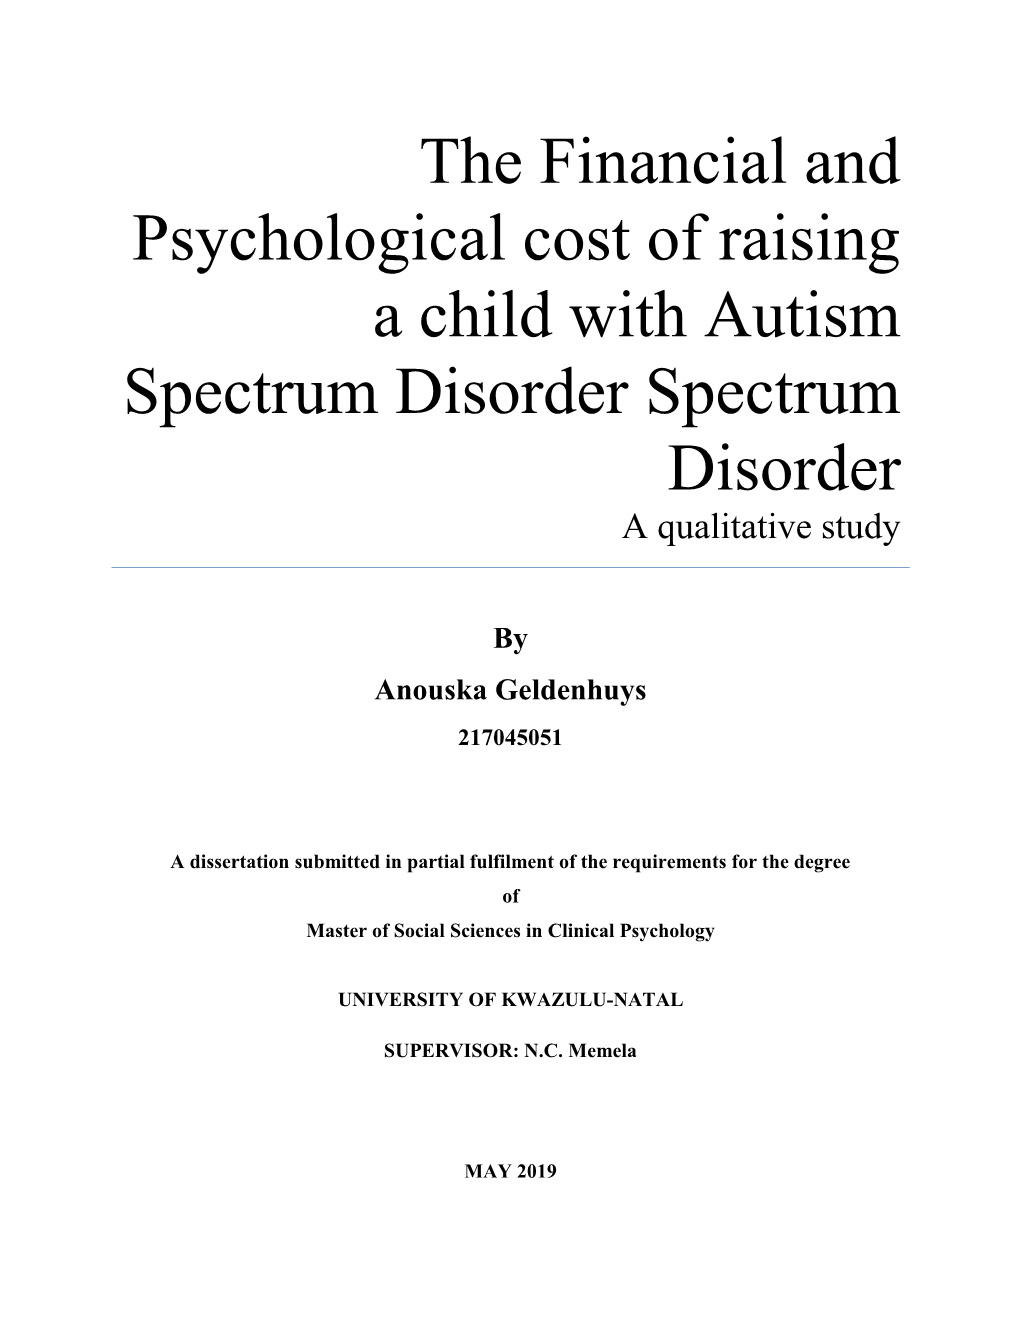 The Financial and Psychological Cost of Raising a Child with Autism Spectrum Disorder Spectrum Disorder a Qualitative Study